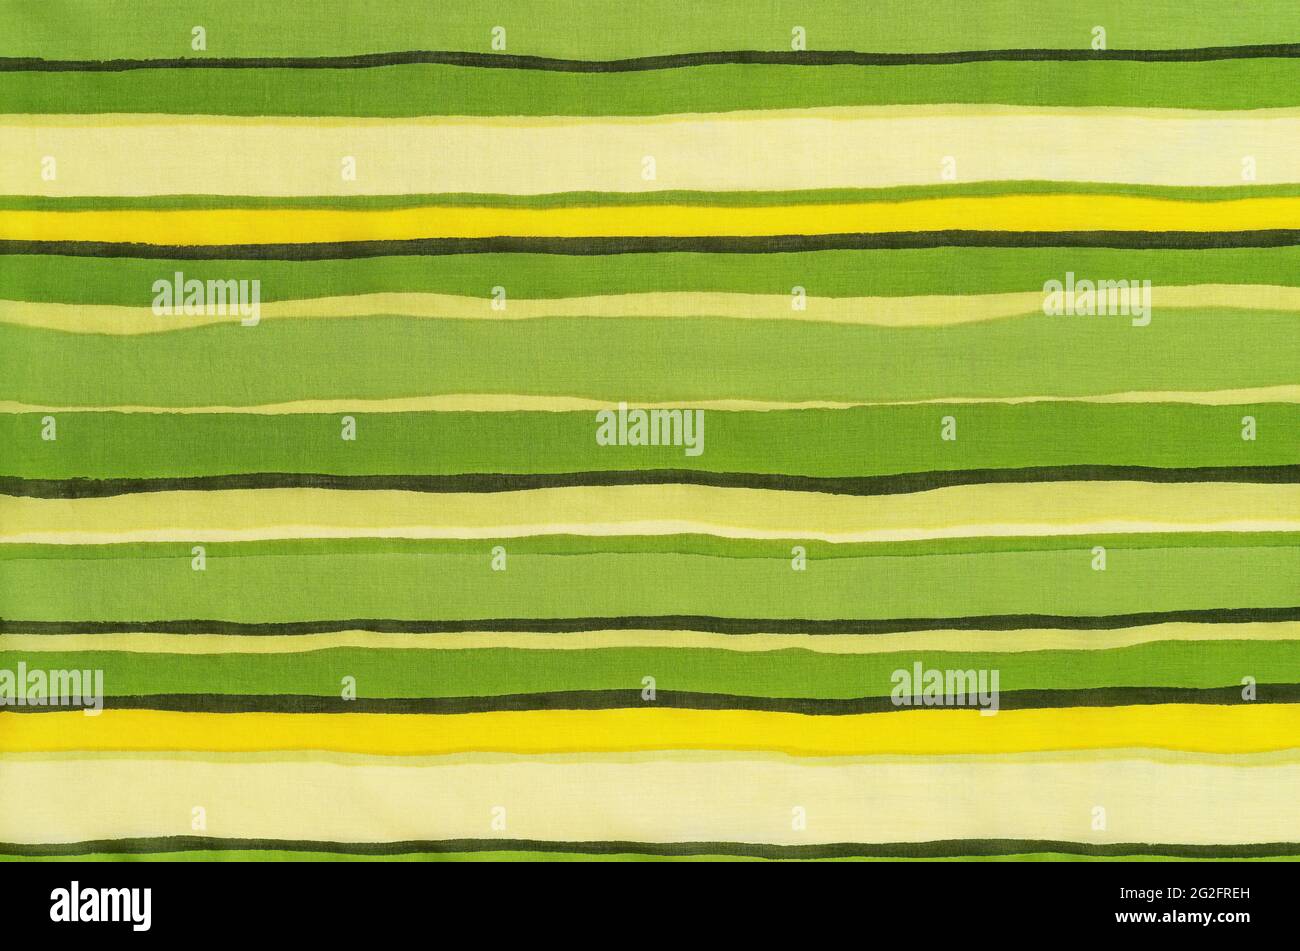 Colorful striped fabric texture. Thin cotton cloth with horizontal colored lines pattern. Textile with green yellow beige brown stripes as background. Stock Photo